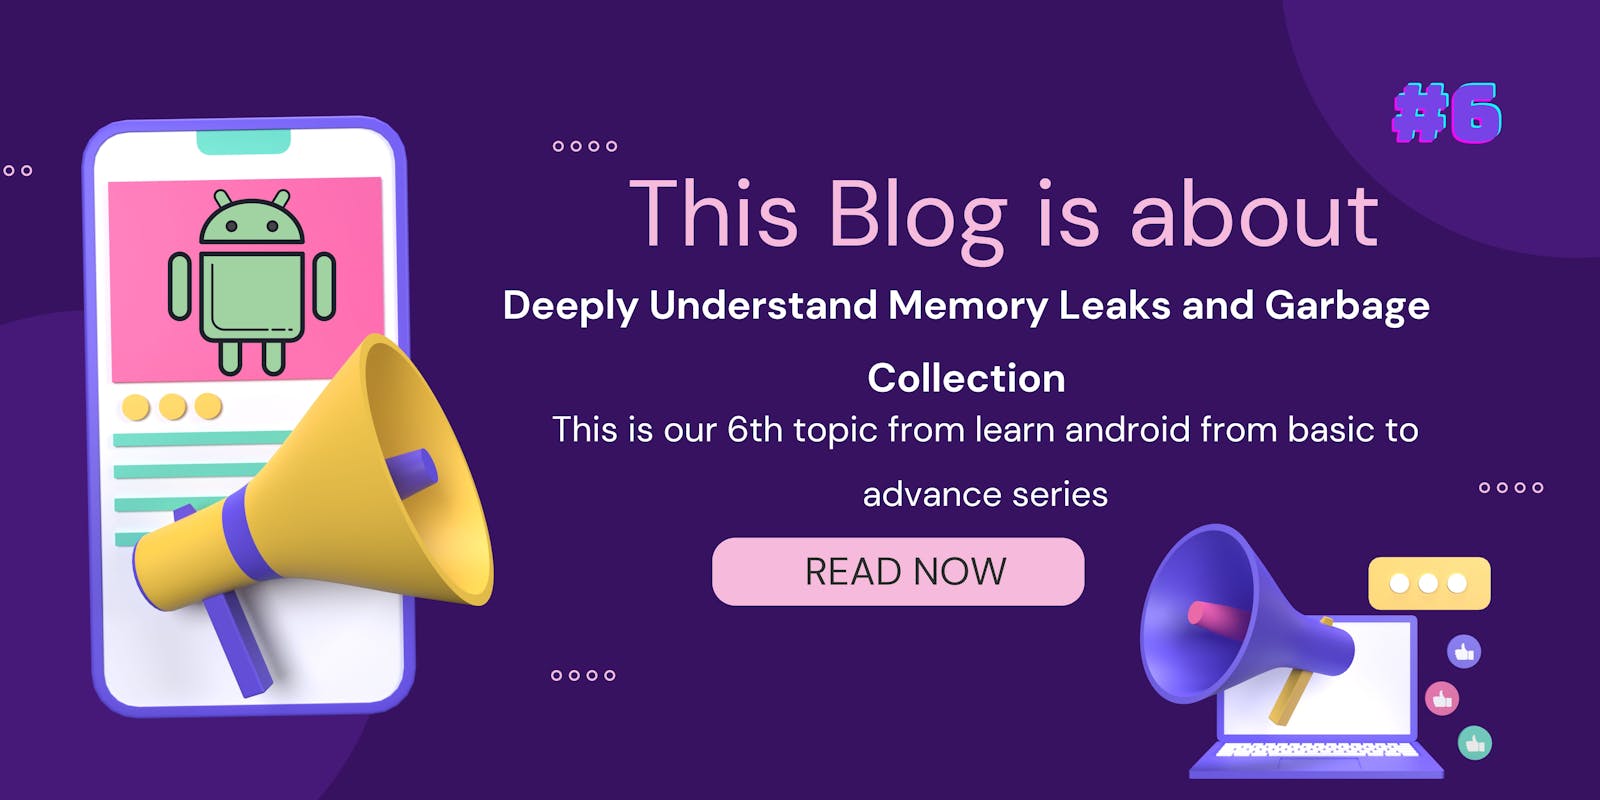 Topic: 6 Deeply Understand Memory Leaks and Garbage Collection